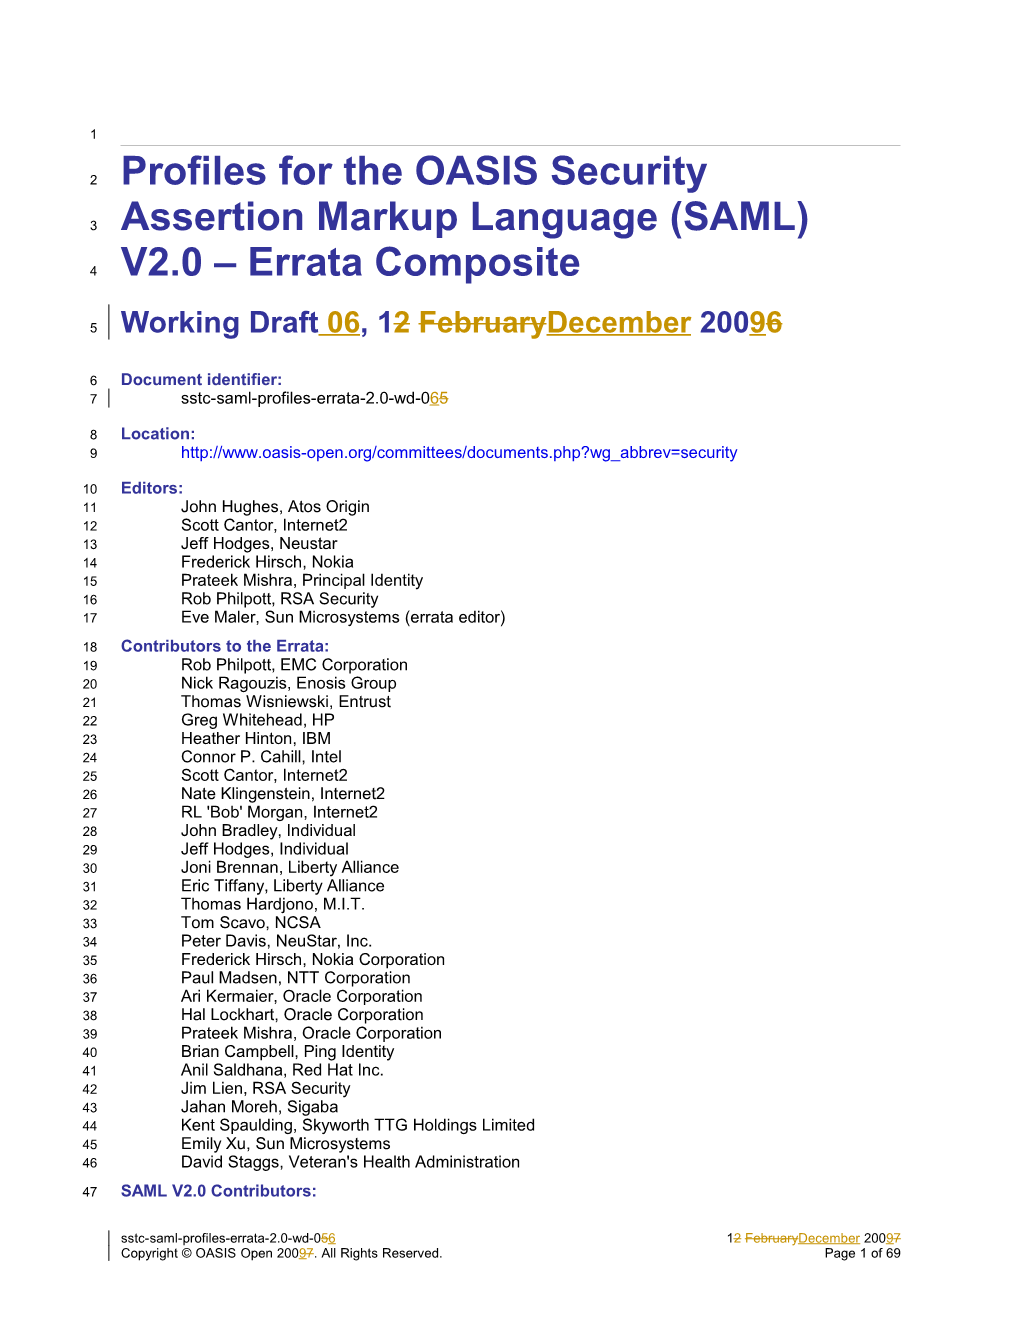 Profiles for the OASIS Security Assertion Markup Language (SAML)